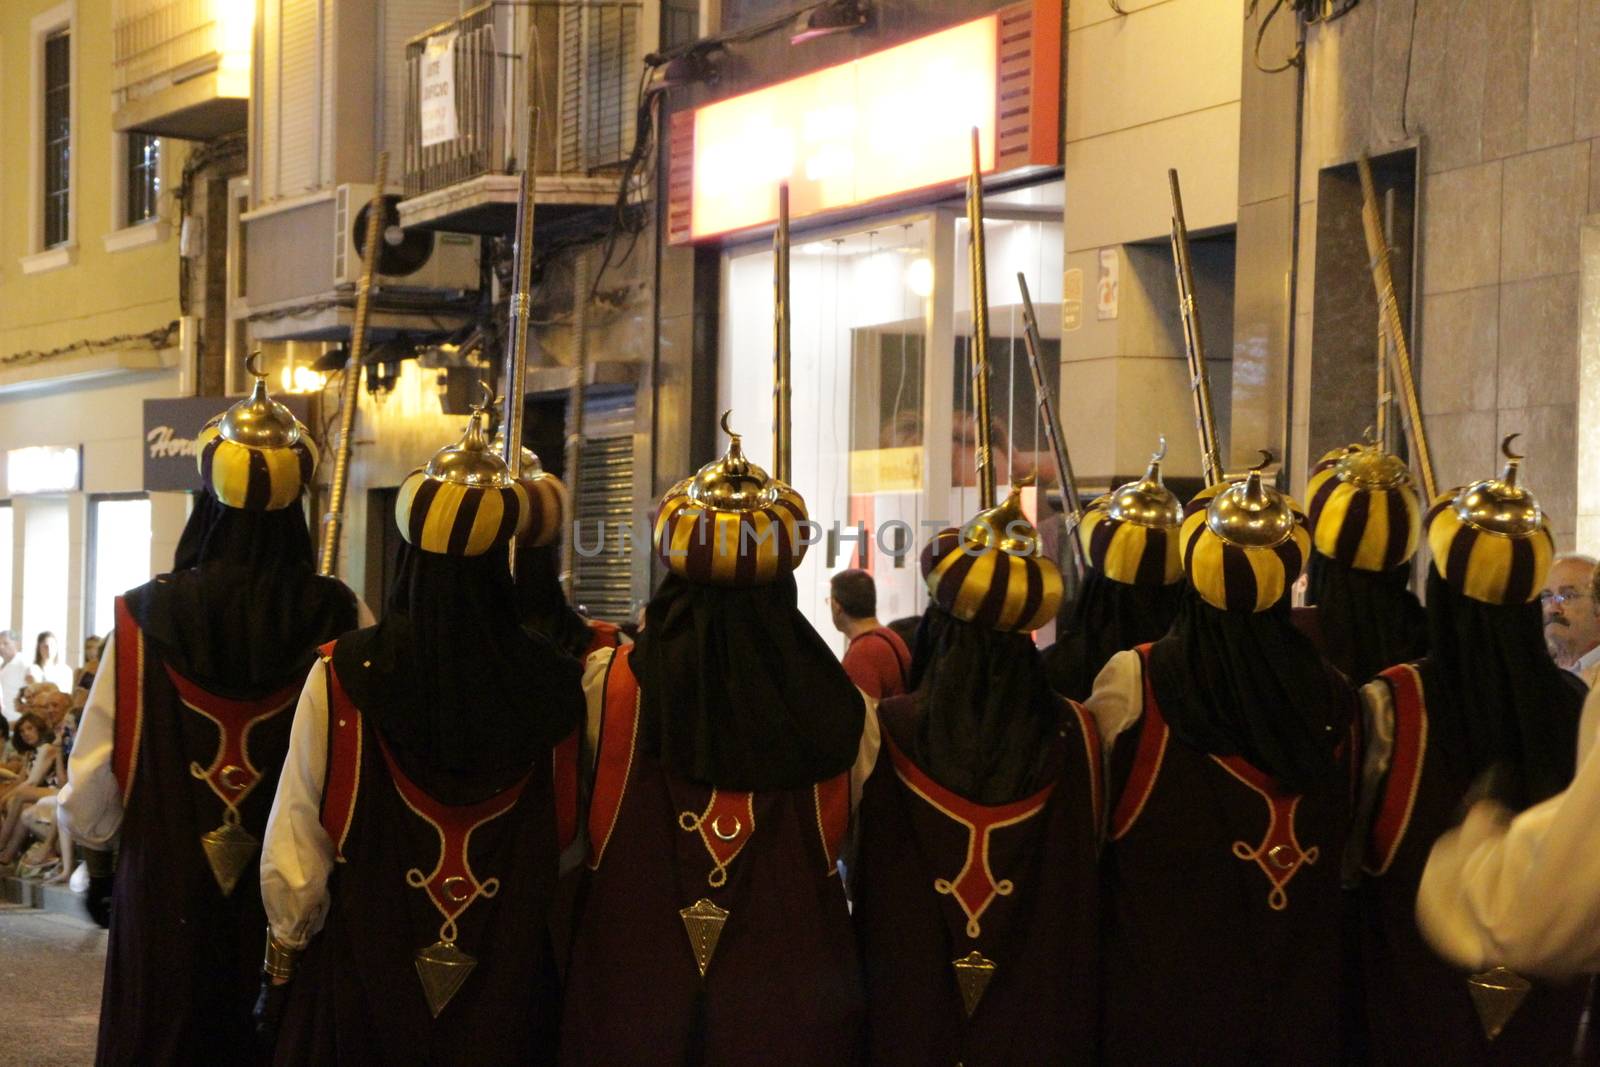 Parade of Moors and Christians for the festivities of Elche, Alicante by soniabonet